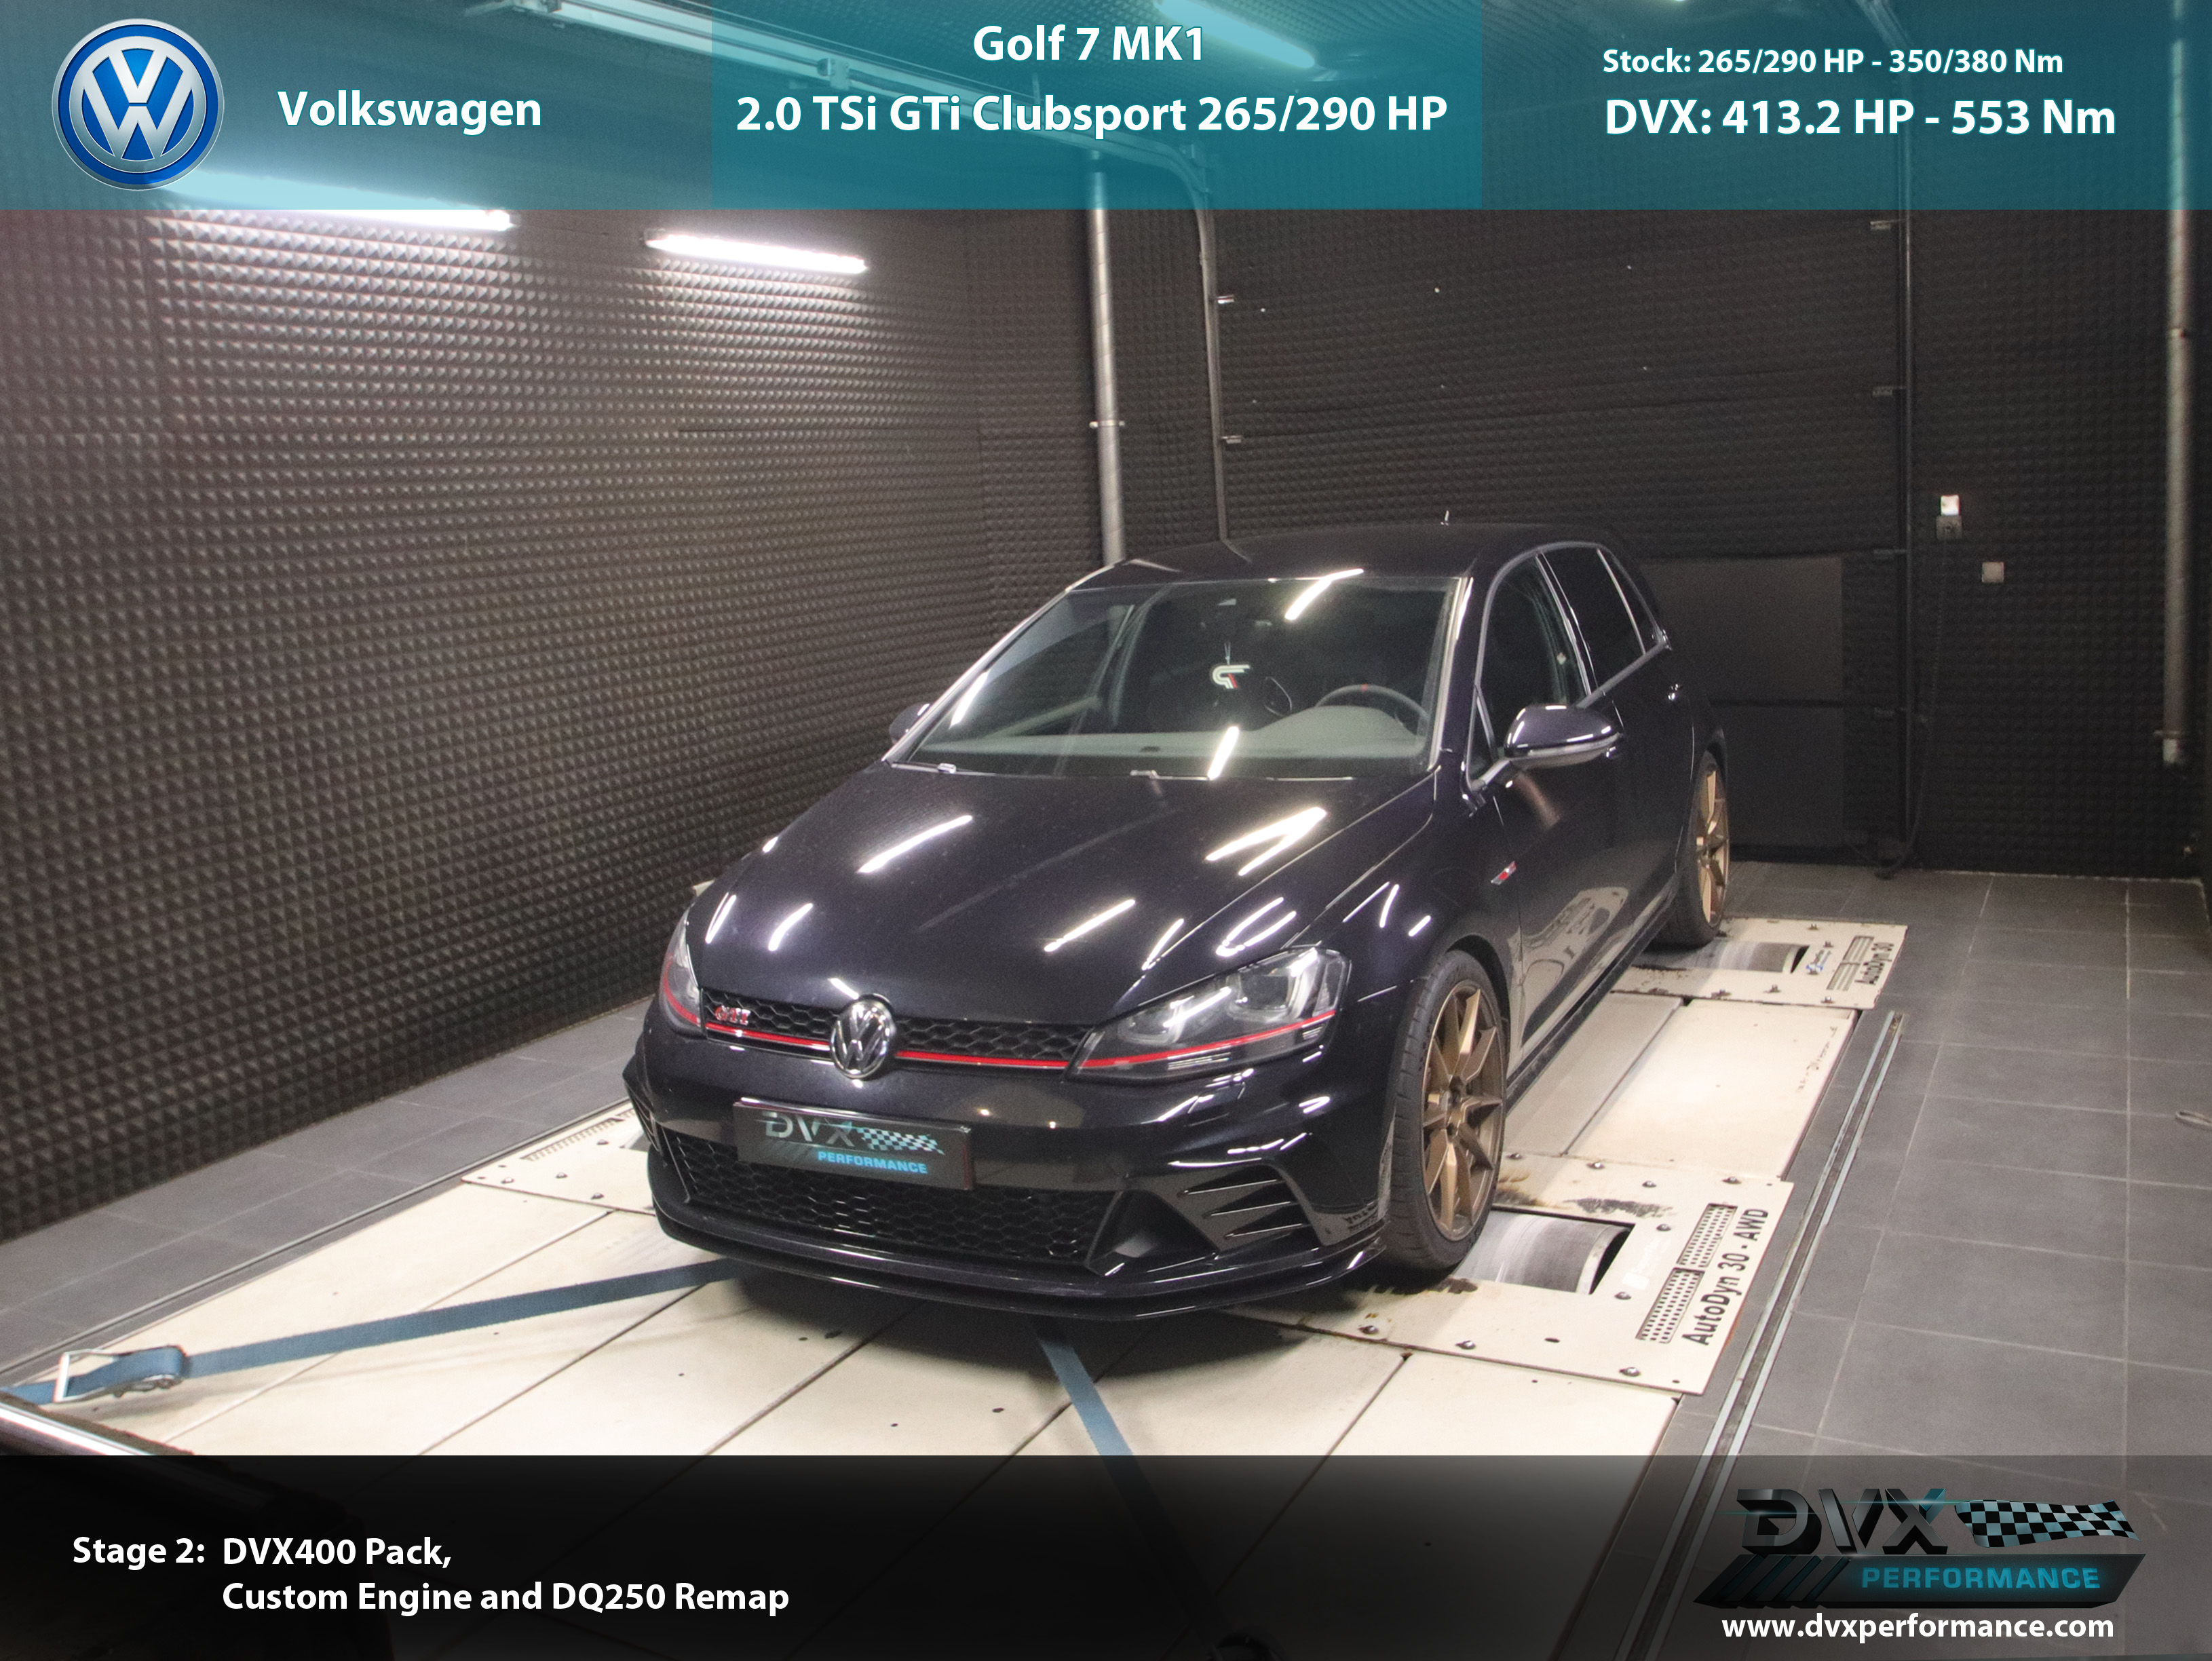 Volkswagen Golf 7 GTI Clubsport 2.0 TSI 265PS Stage 1 Chiptuning